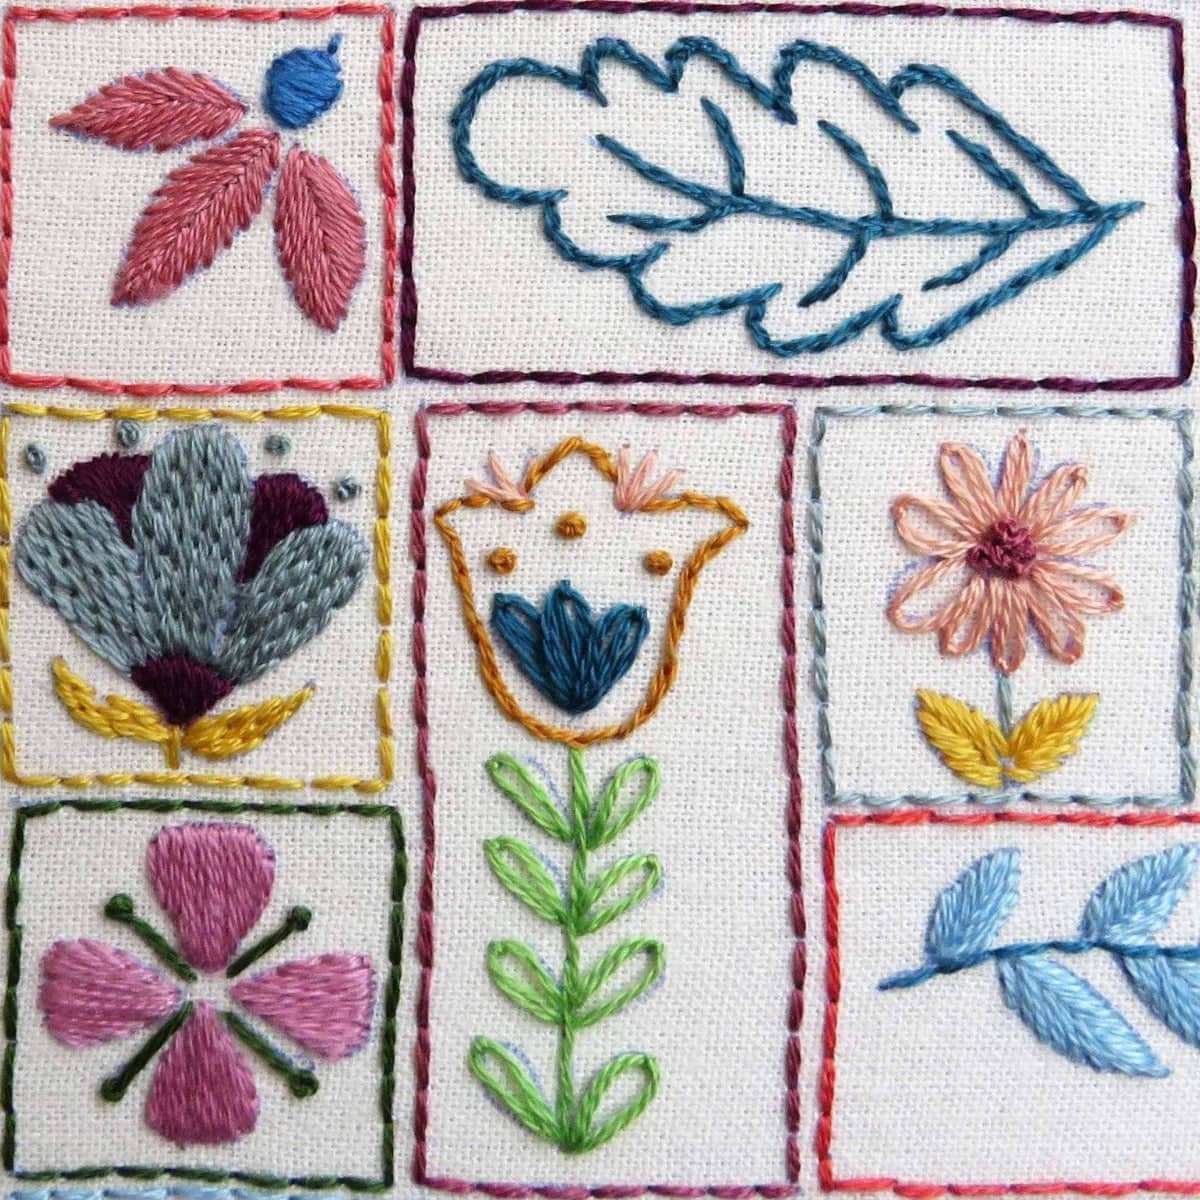 Flowery Folk, Hand Embroidery Pattern , PDF Download , StitchDoodles , embroidery hoop kit, embroidery kits for adults, embroidery kits for beginners, embroidery patern, flower embroidery, hand embroidery, modern embroidery kits, PDF pattern, unique embroidery kits , StitchDoodles , shop.stitchdoodles.com